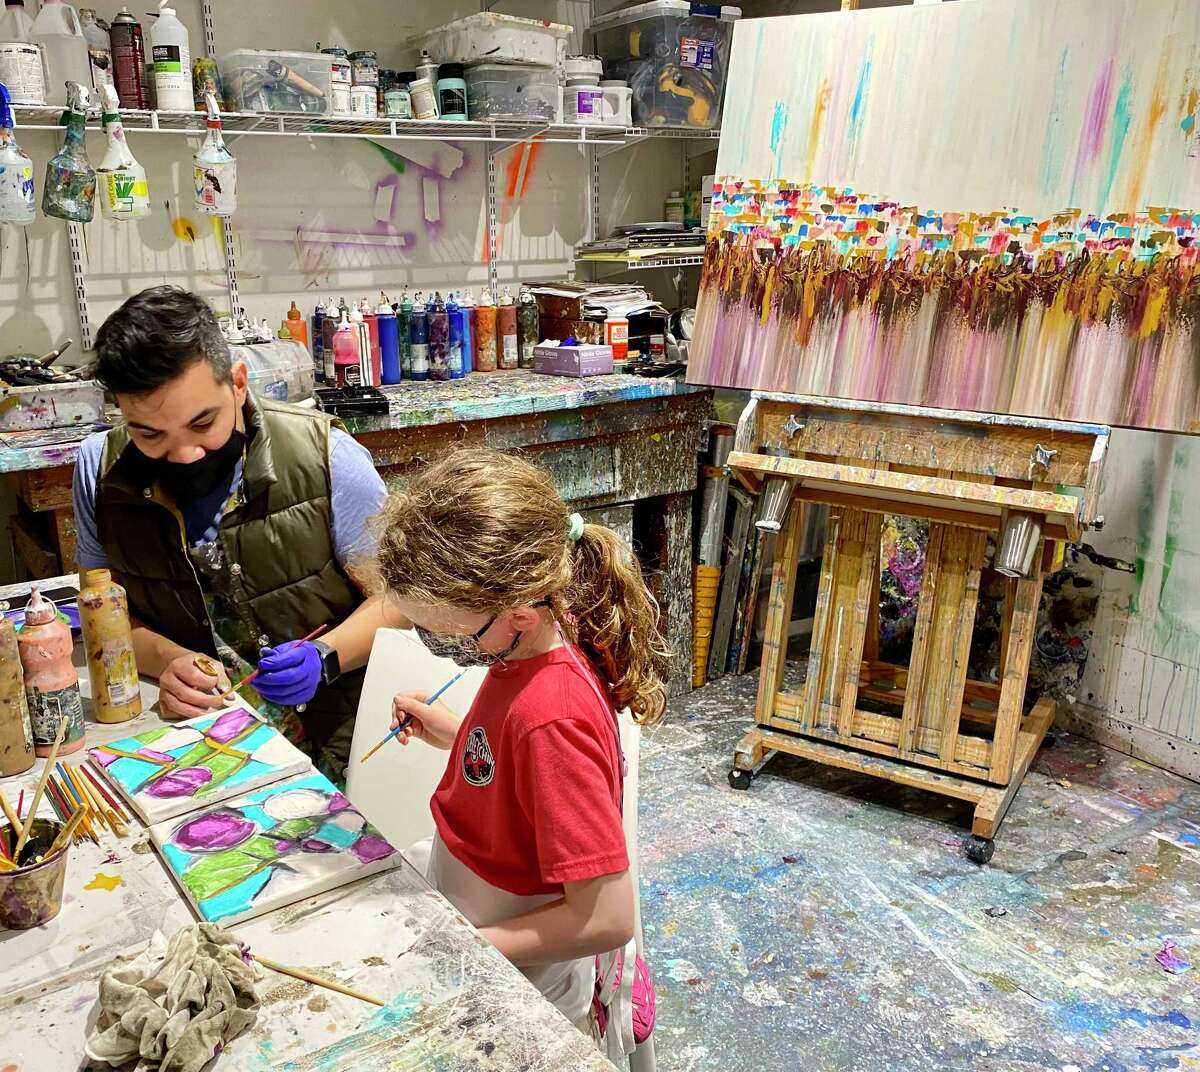 Nora Verville, 9, from The Woodlands, is a resident artist at The Bella Bottega artist community just off FM 1488 at Honea Egypt Road. As of this March, she’s also an artist in residence at Gallery Skye in Houston. Her work has been displayed at several galleries with many pieces selling. Pictured here, Nora paints with Houston artist Edgar Medina.